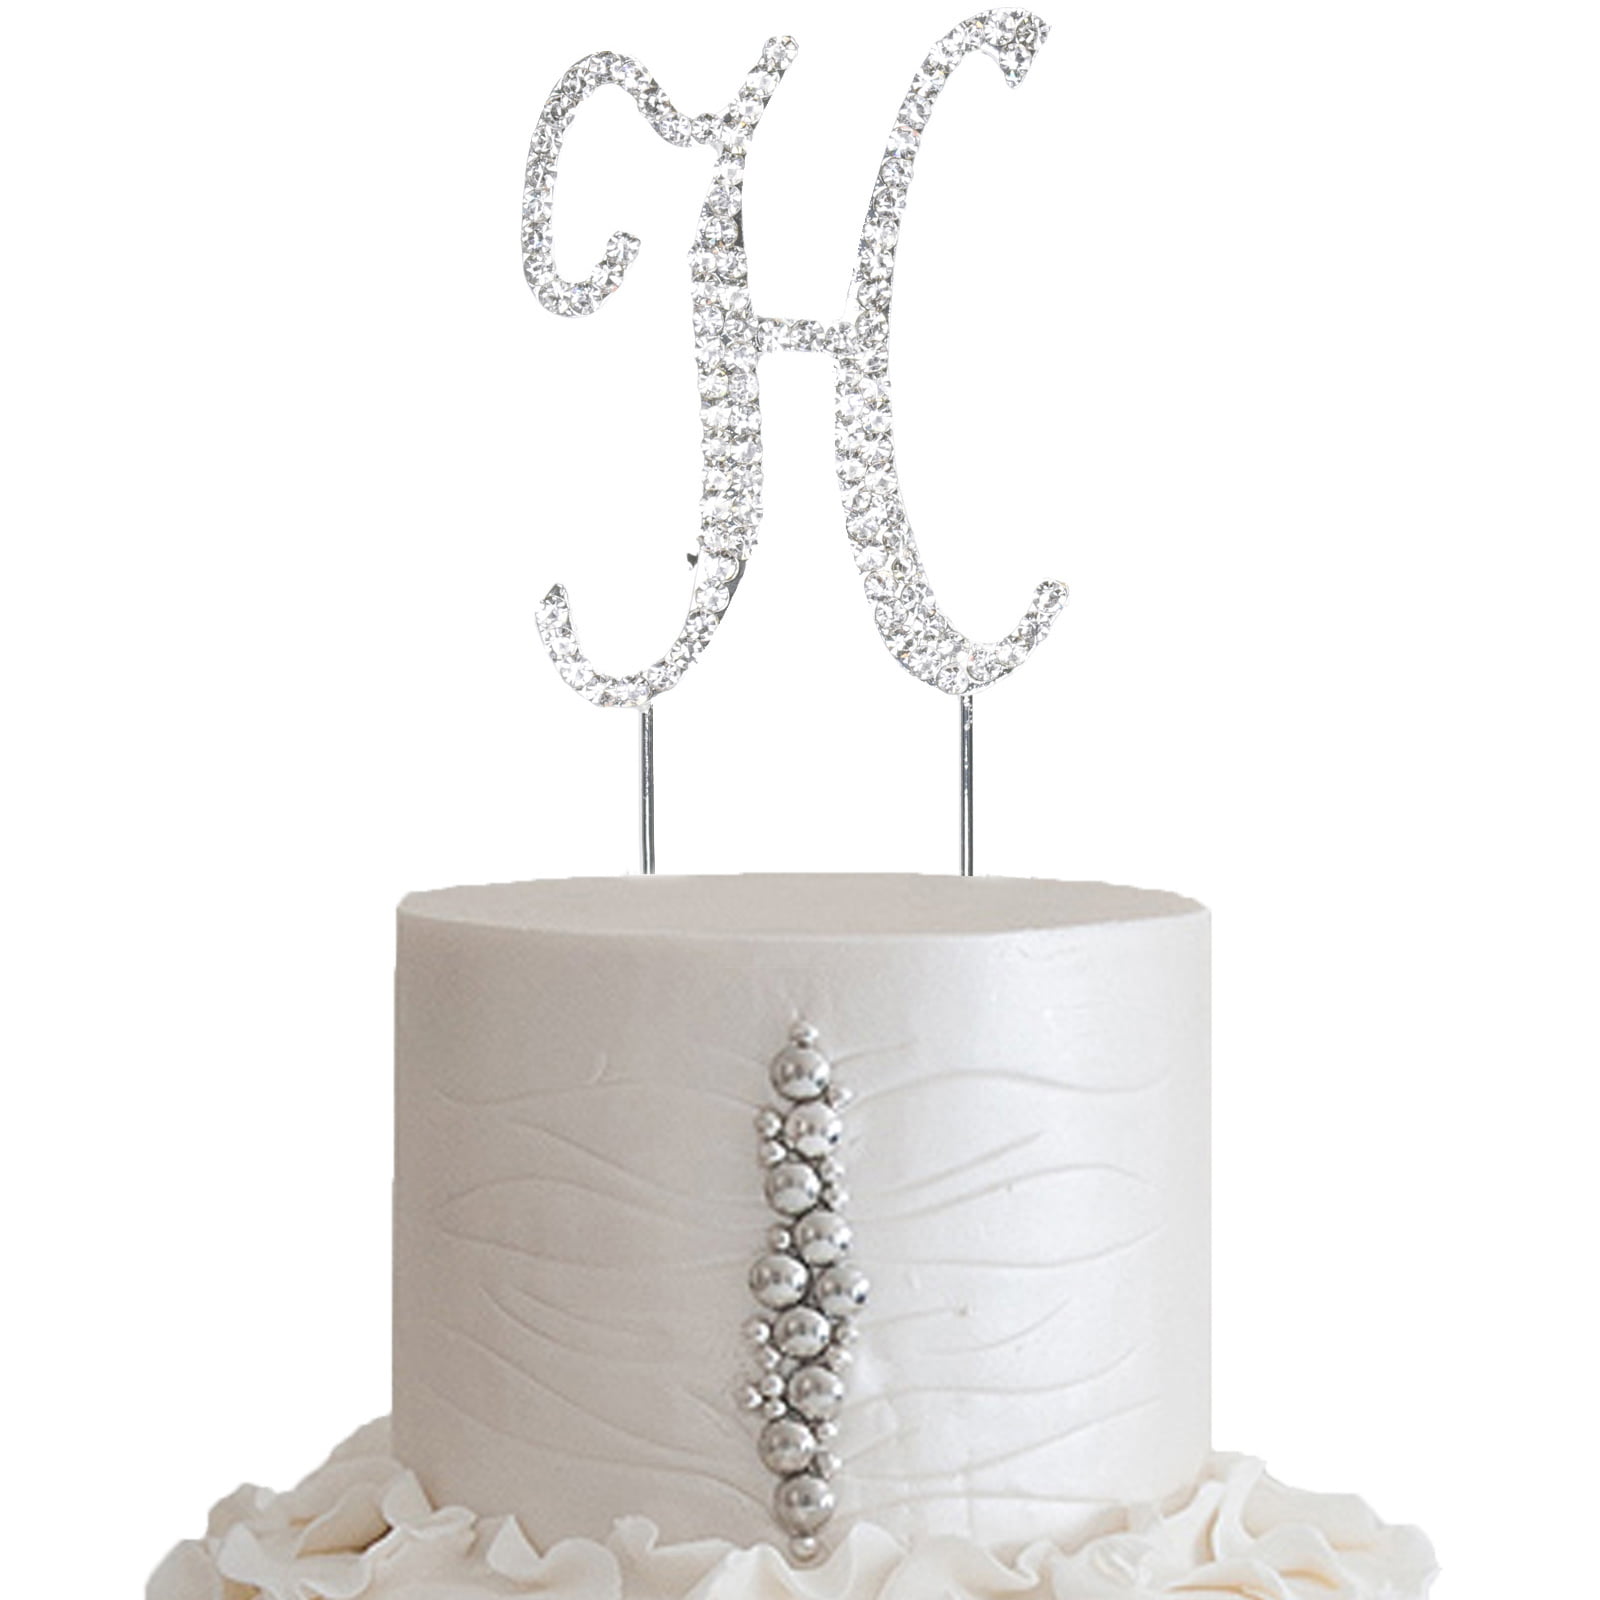 2.5" Tall Bling Rhinestone Number 1 Wedding Party Cake Toppers 